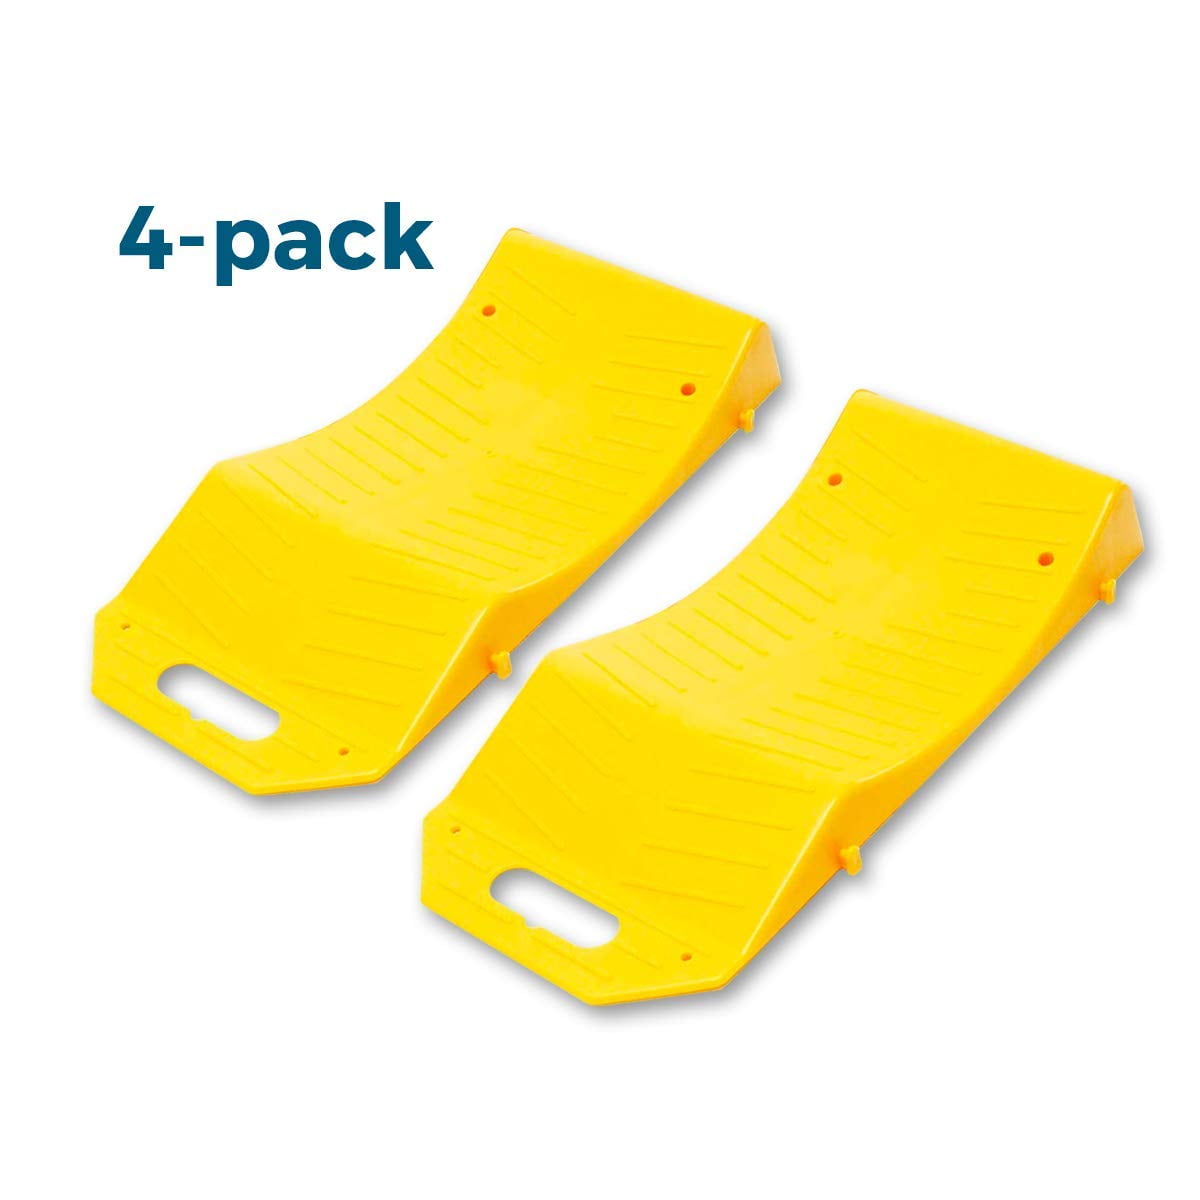 Zento Deals 4 Piece Tire Saver Ramps Premium Quality Wheel Protector Easy to Store High Visibility Flat Tire Prevention for Flat Spots Durable Plastic Material